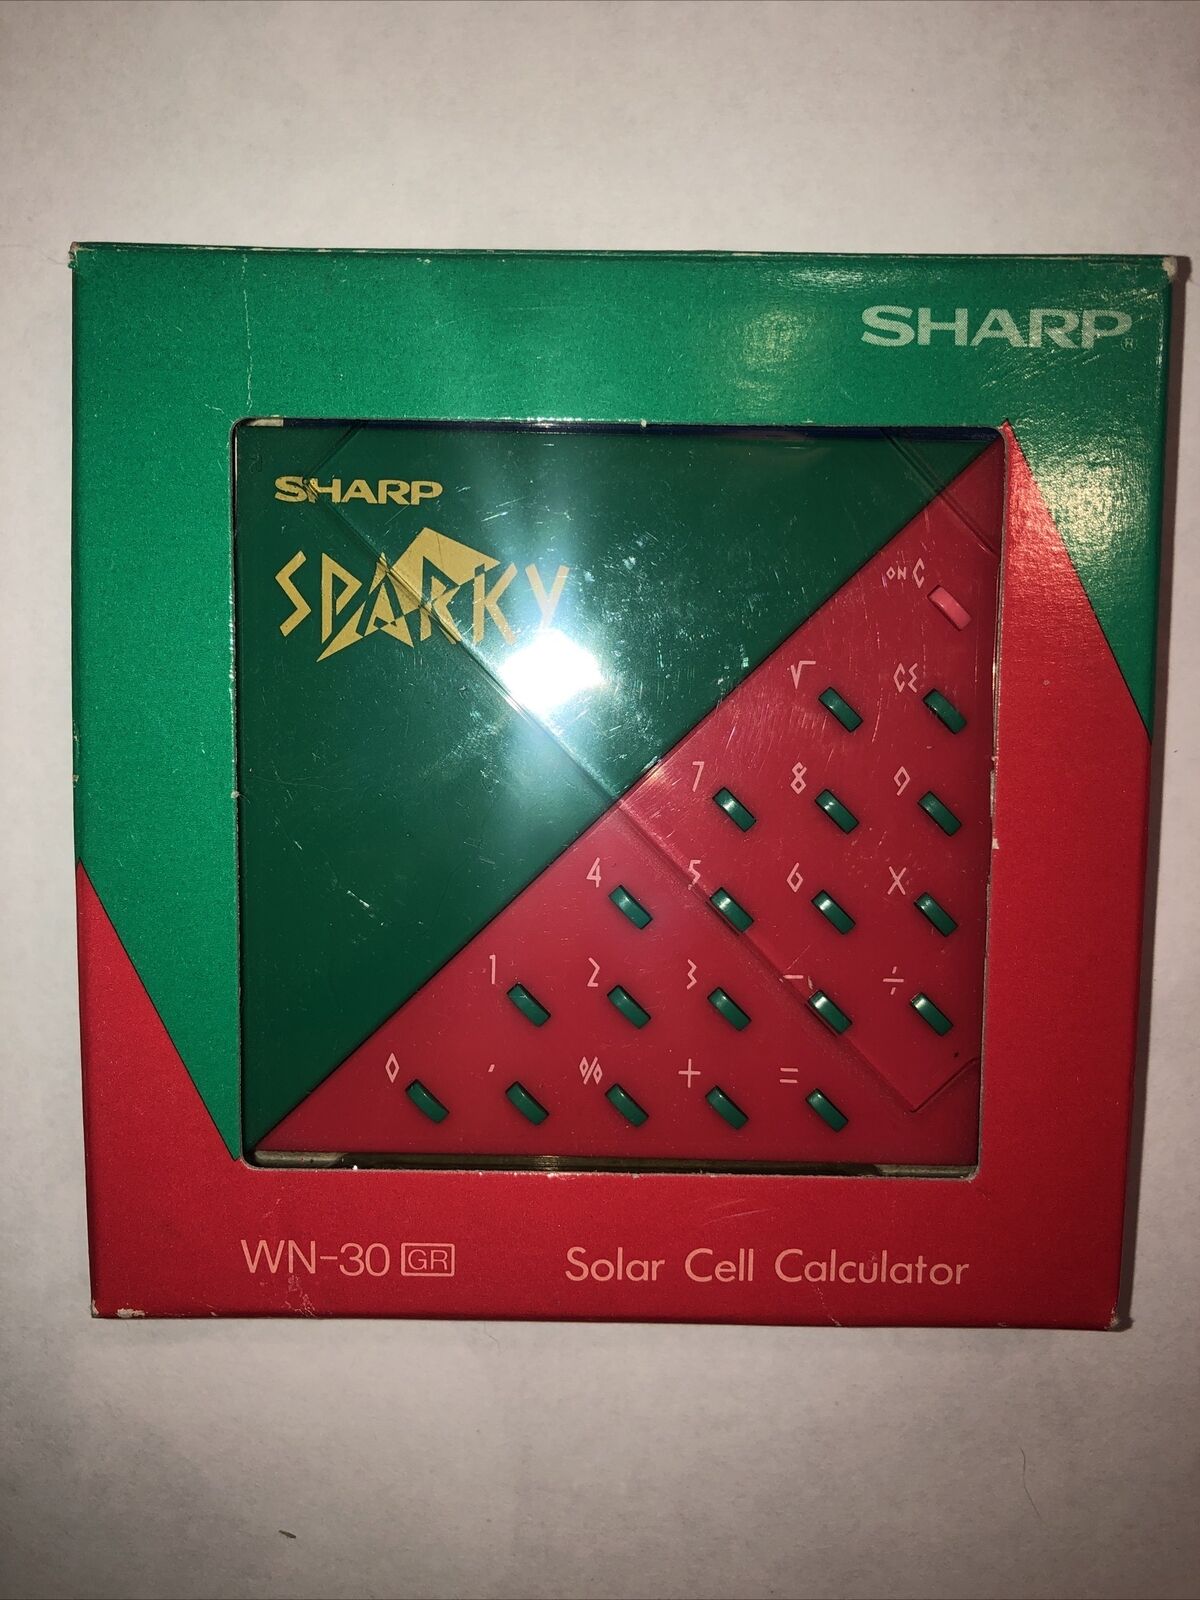 VTG 80'S SPARKY SHARP CALCULATOR WN-30 SOLAR CELL Rare In Box  Complete Working